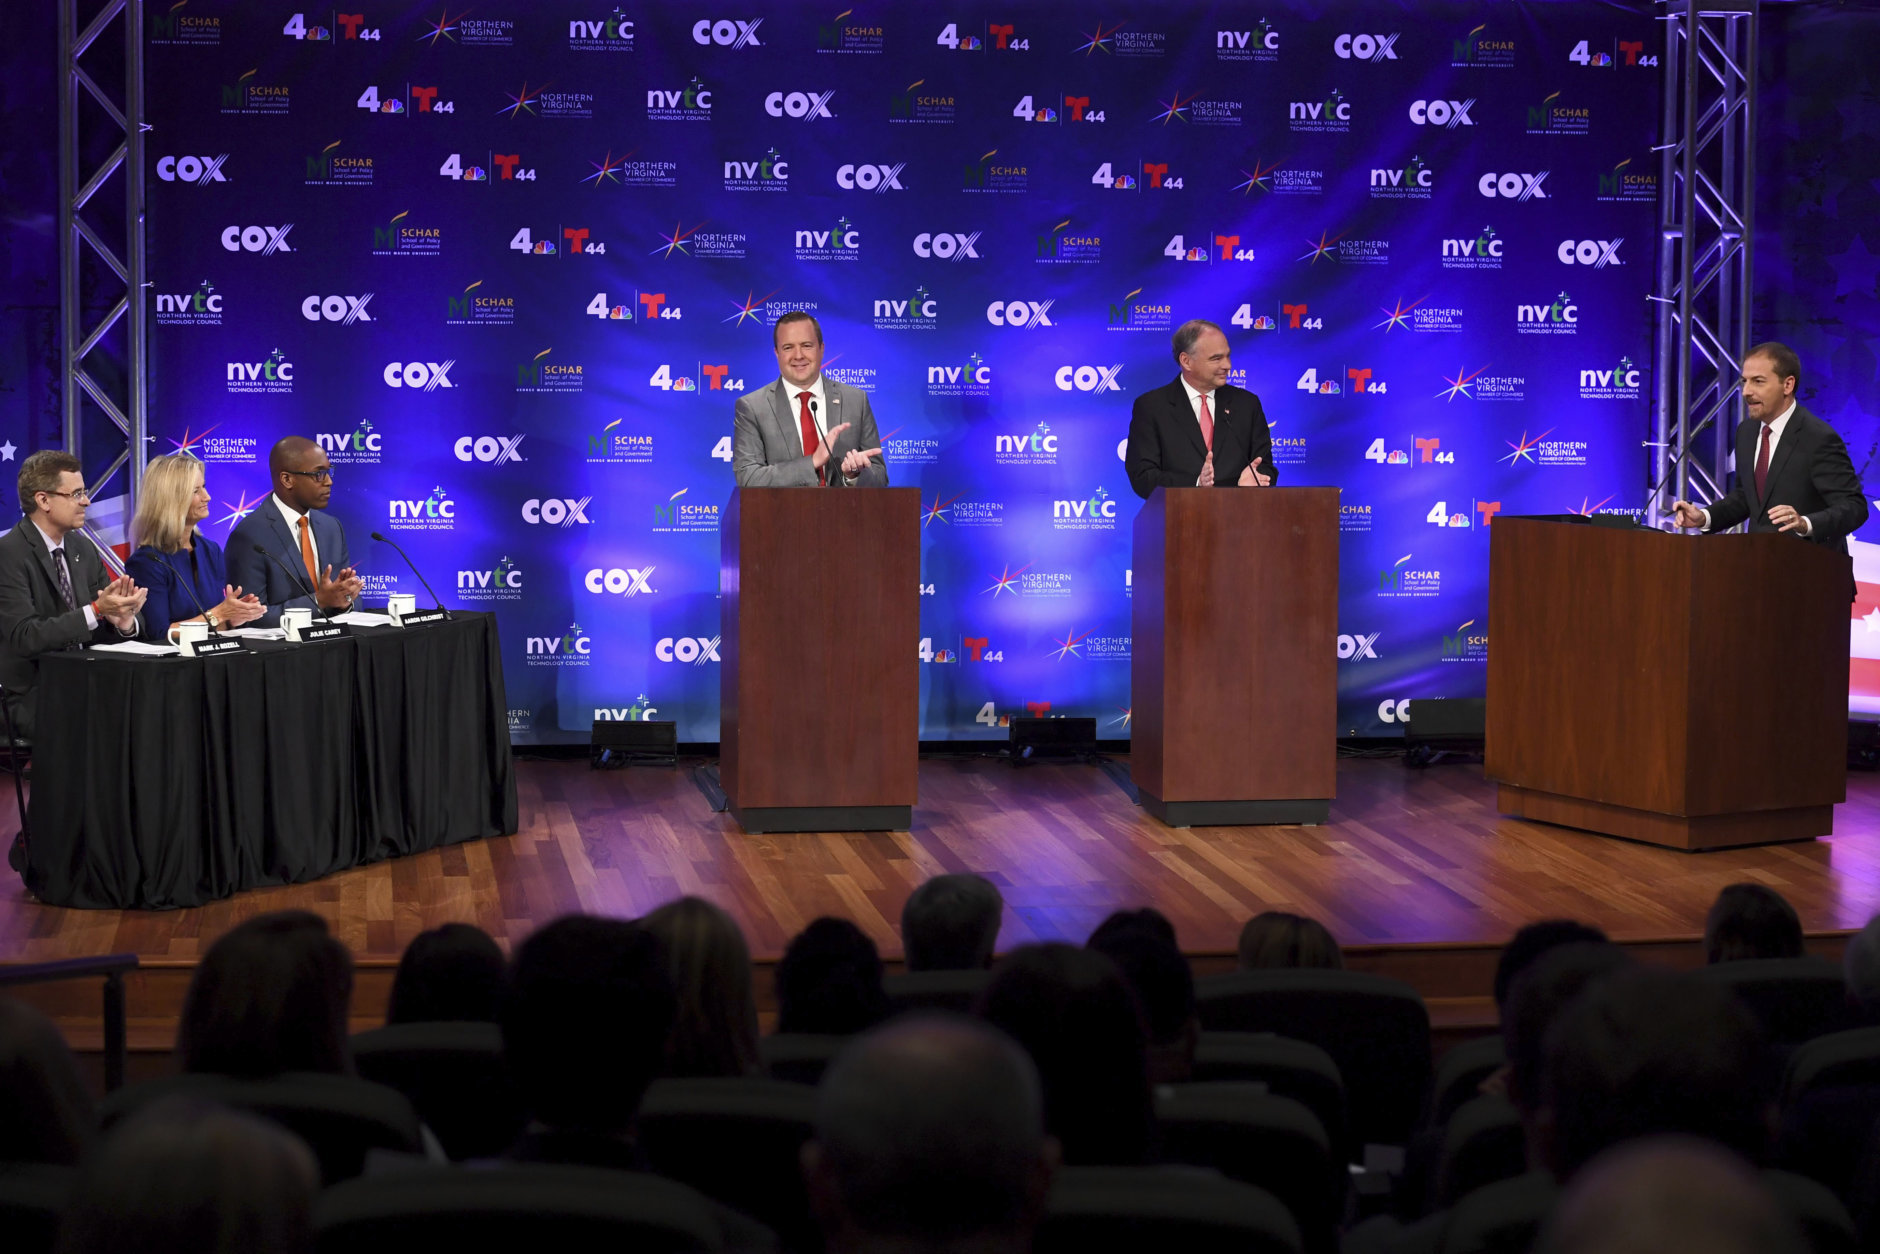 Republican Corey Stewart, at left podium, and Democratic U.S. Sen. Tim Kaine, at center podium, participate in a senatorial debate as moderator Chuck Todd stands at right, Wednesday, Sept. 26, 2018, at Capital One headquarters, in McLean, Va. (Katherine Frey/The Washington Post via AP, Pool)